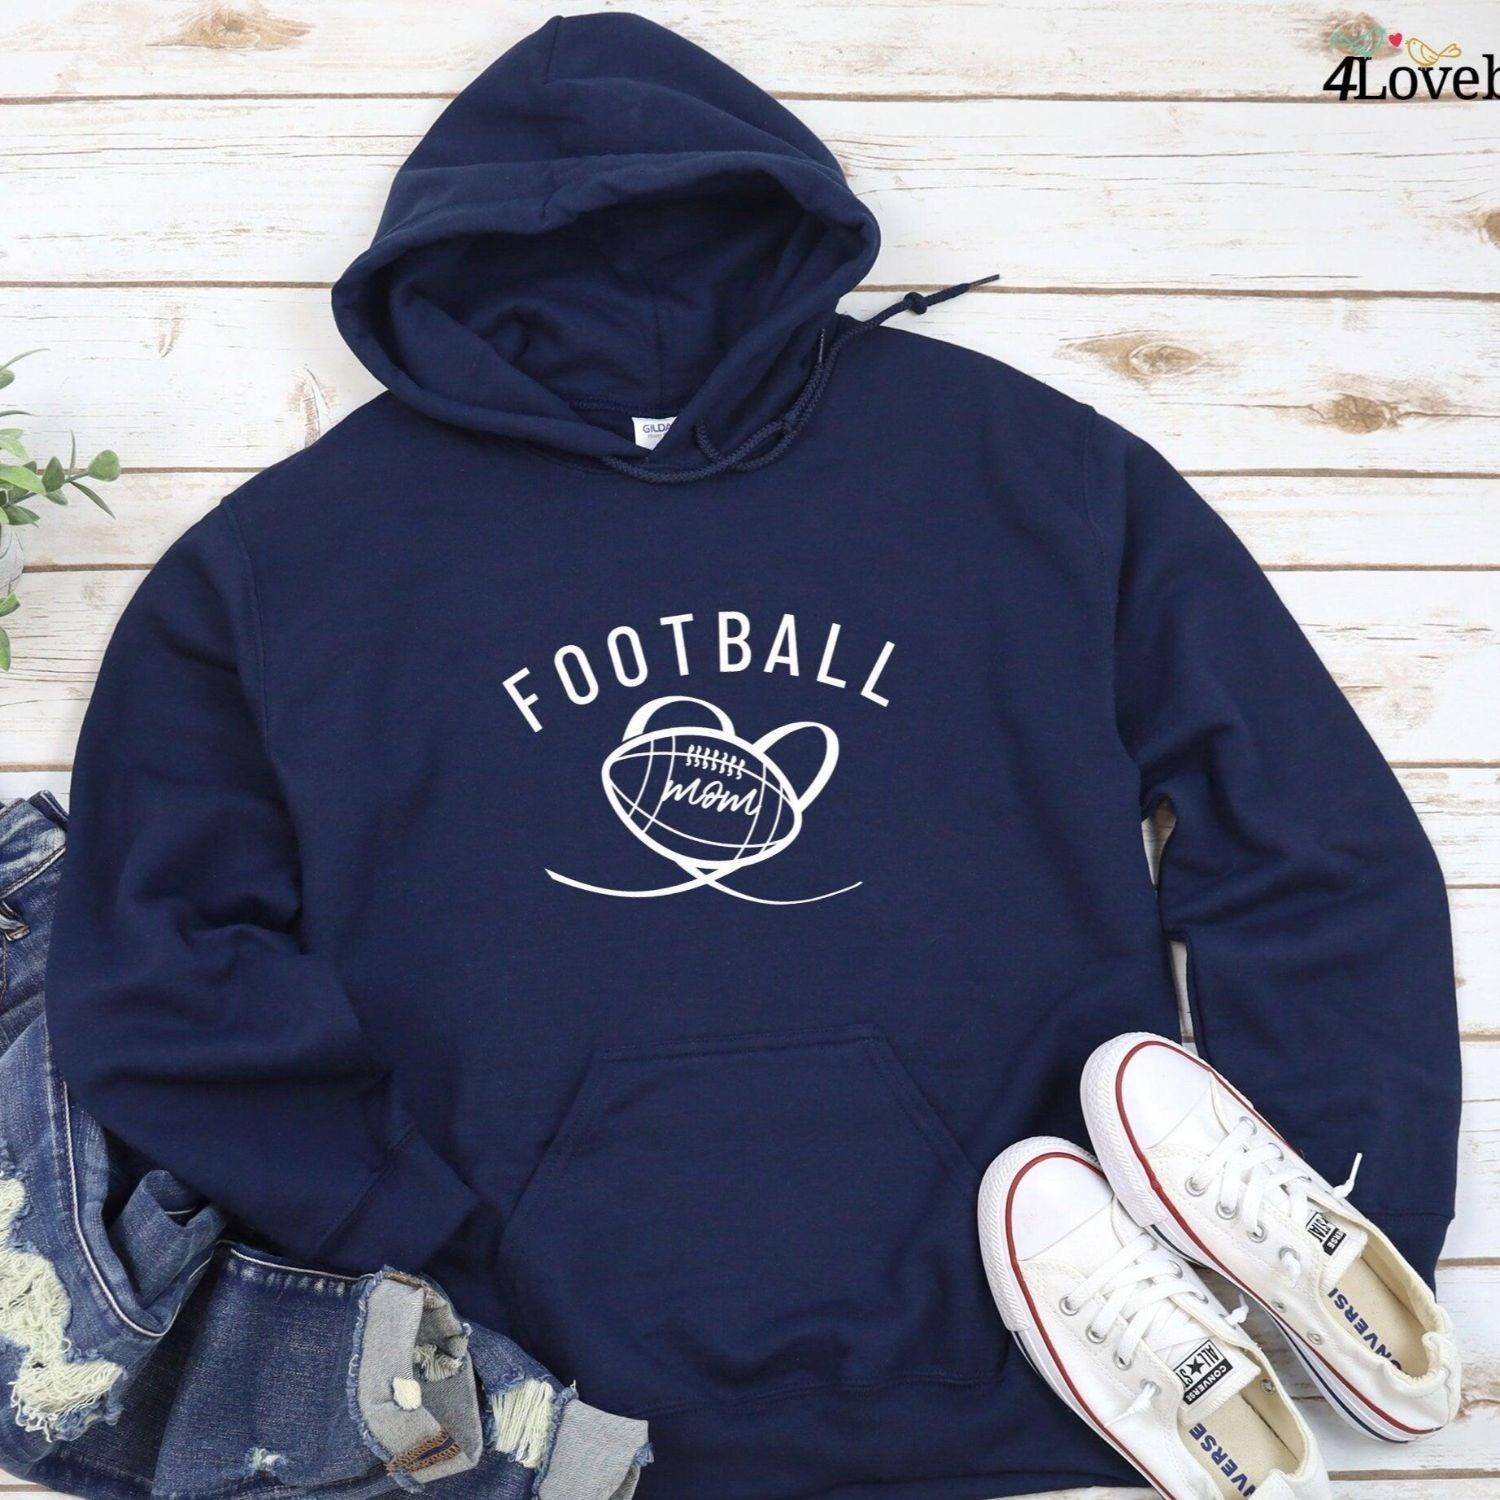 Football Game Day Outfits: Cozy Matching Set for Mom & Dad - Vibes Combo  Edition